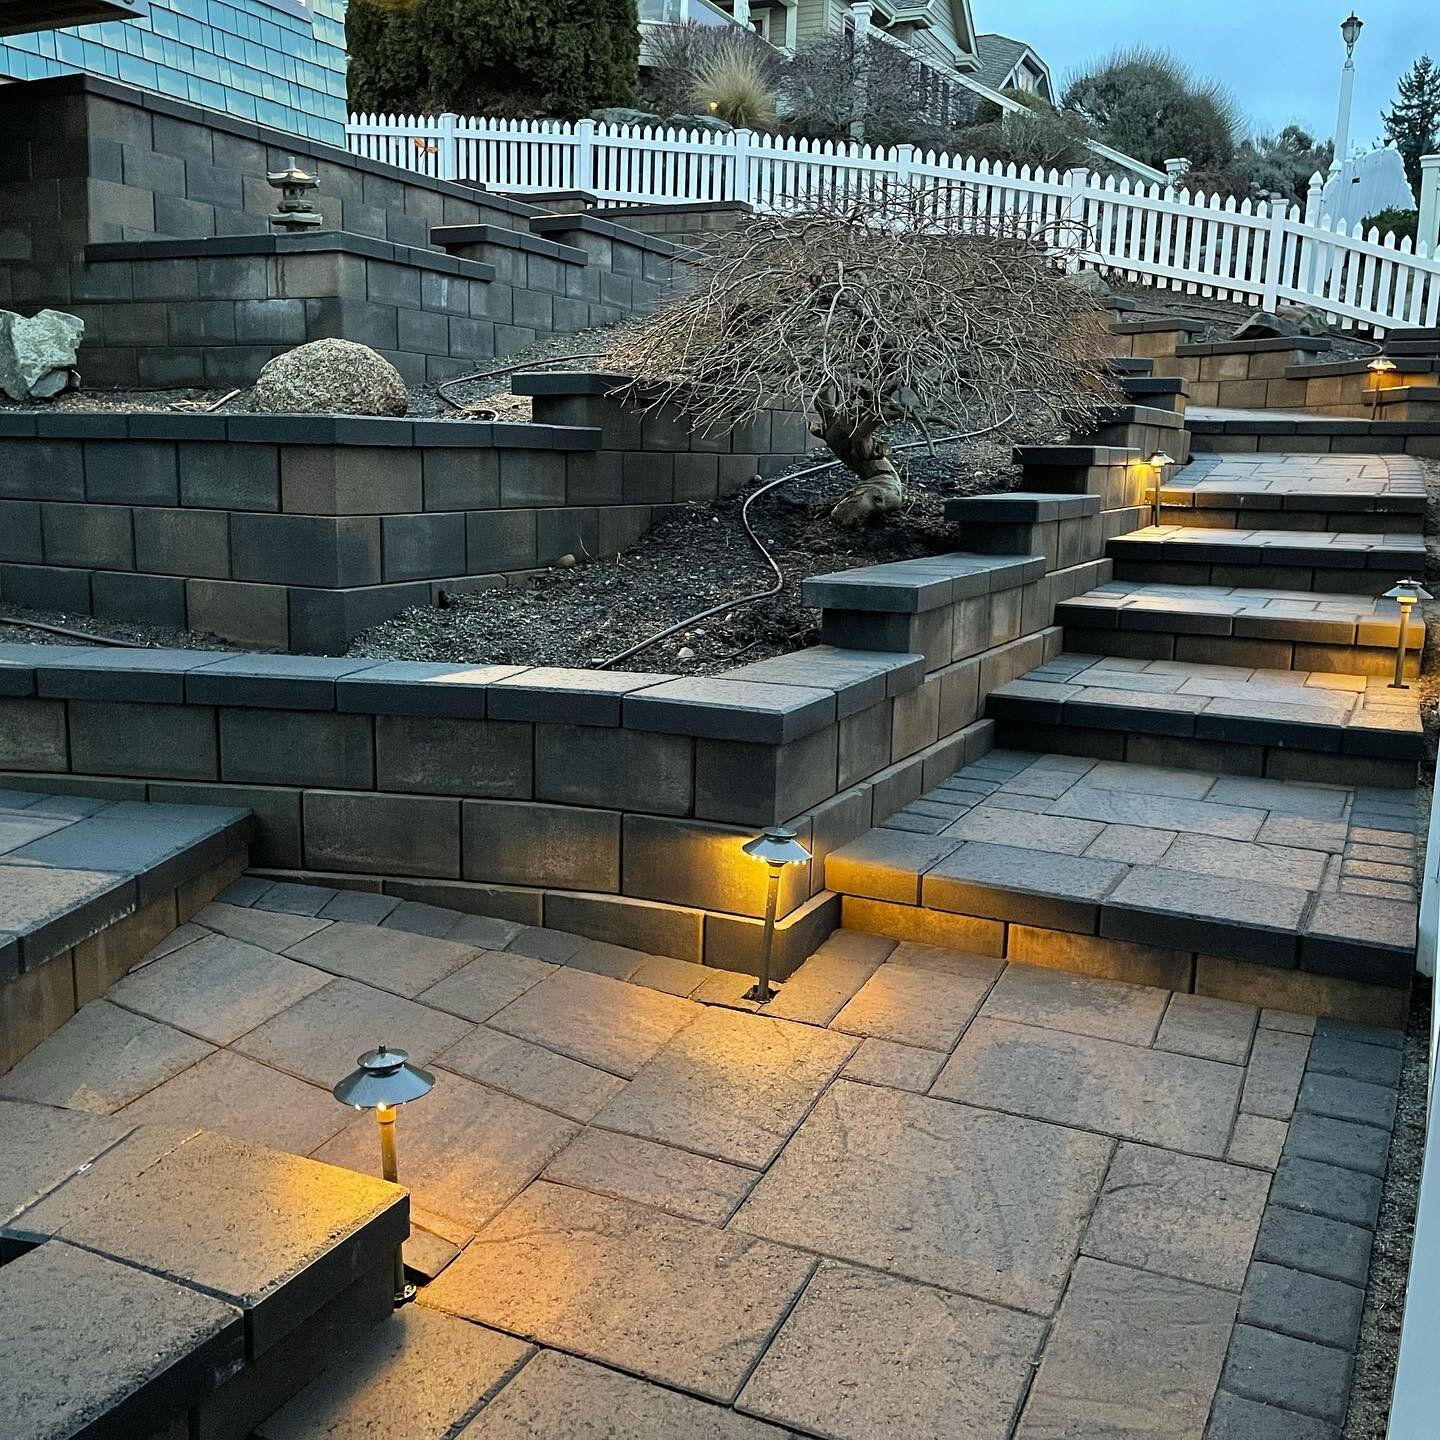 Before &amp; After of this amazing project we completed in Edmonds, WA - Landscape Lighting with La Pietra pavers in Columbia blend with Murata Walls in Olympian color. 

#hardscape #outdoorliving #pavers #retainingwall #walkway #landscapelighting #m